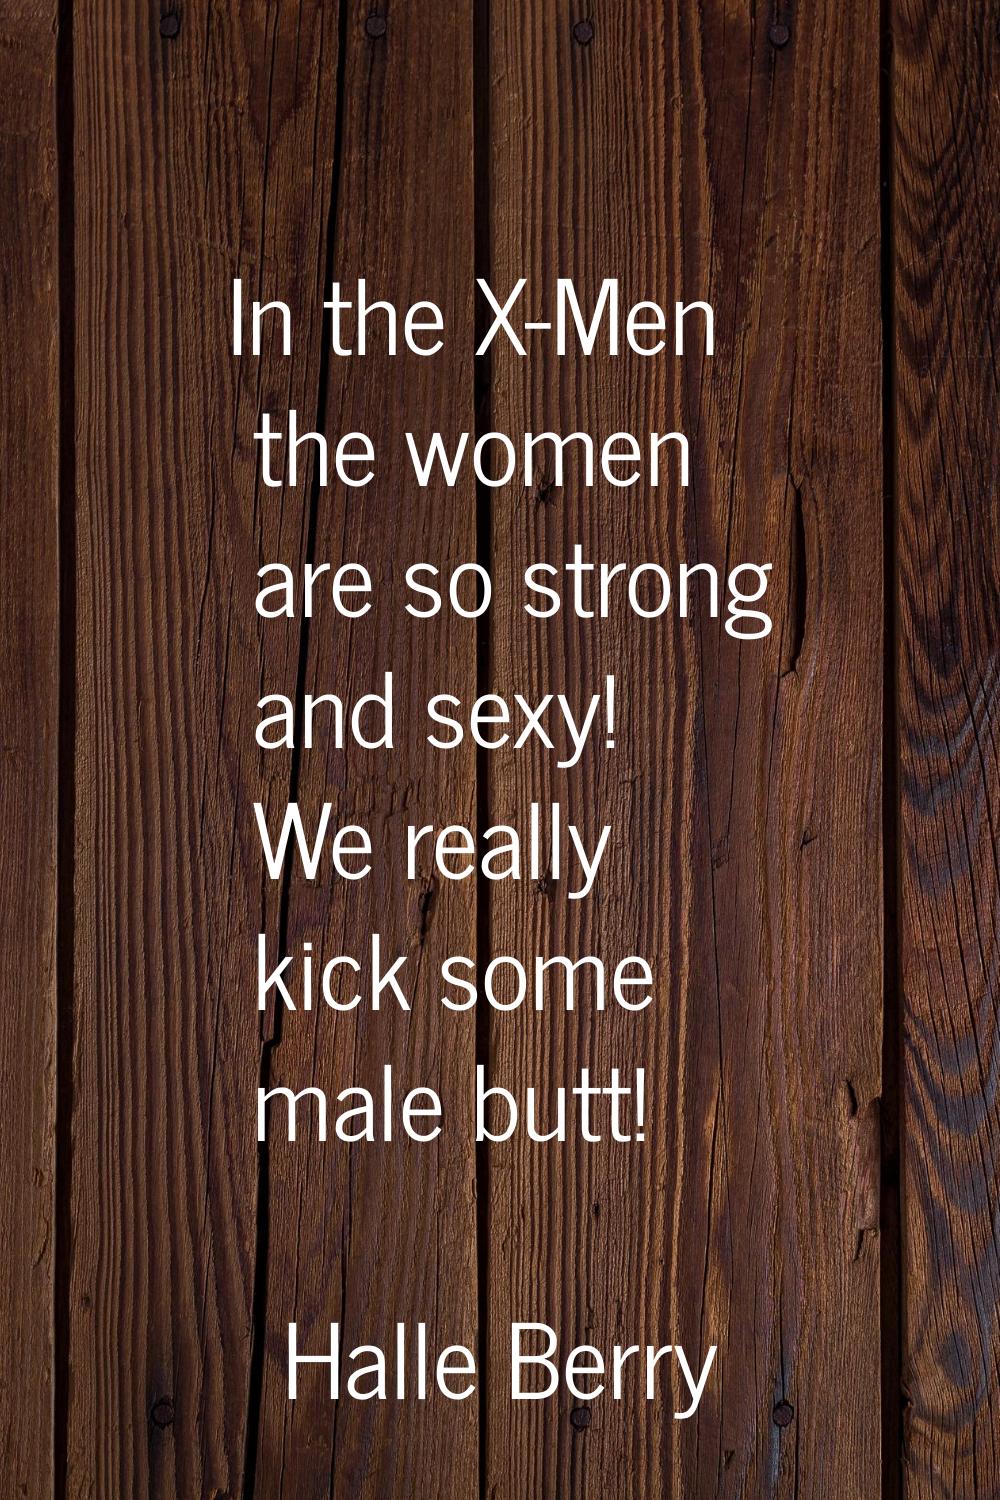 In the X-Men the women are so strong and sexy! We really kick some male butt!